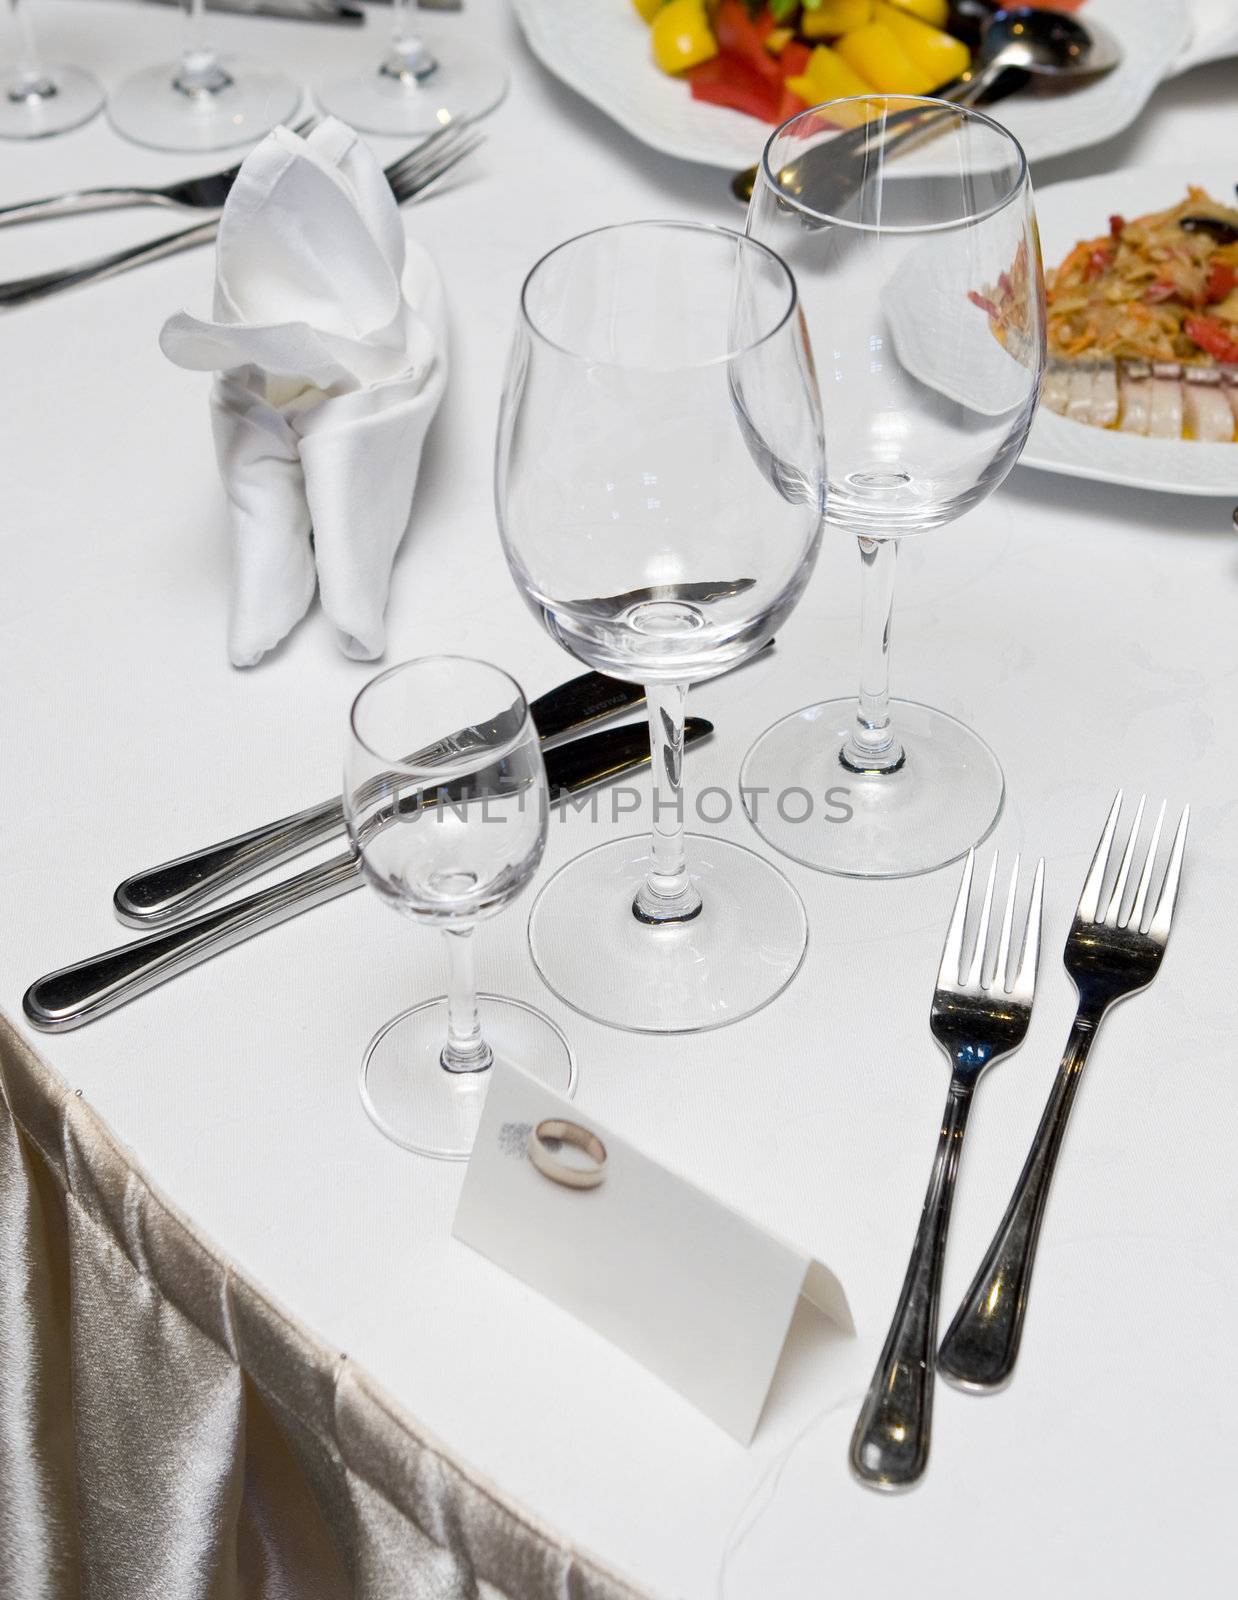 Decorated wedding banquet table with name card